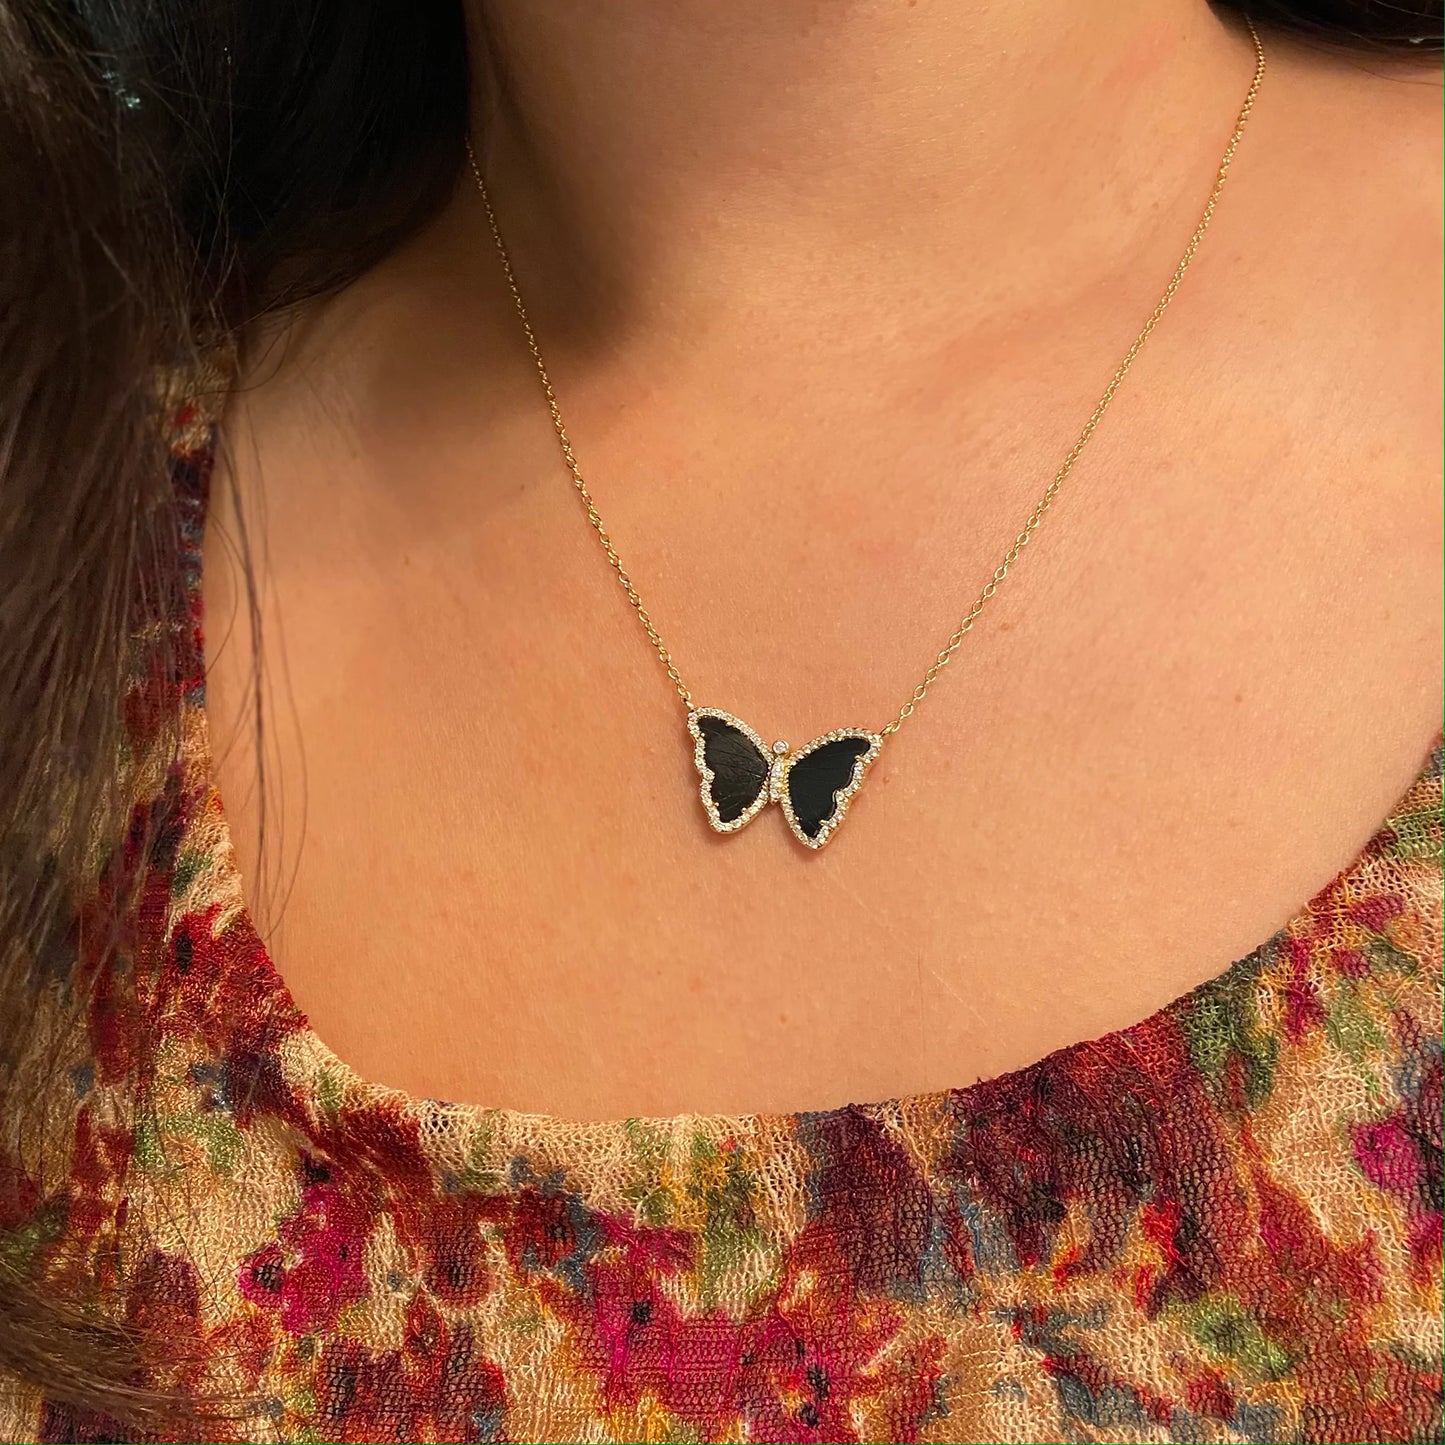 KAMARIA BLACK ONYX BUTTERFLY NECKLACE WITH CRYSTALS